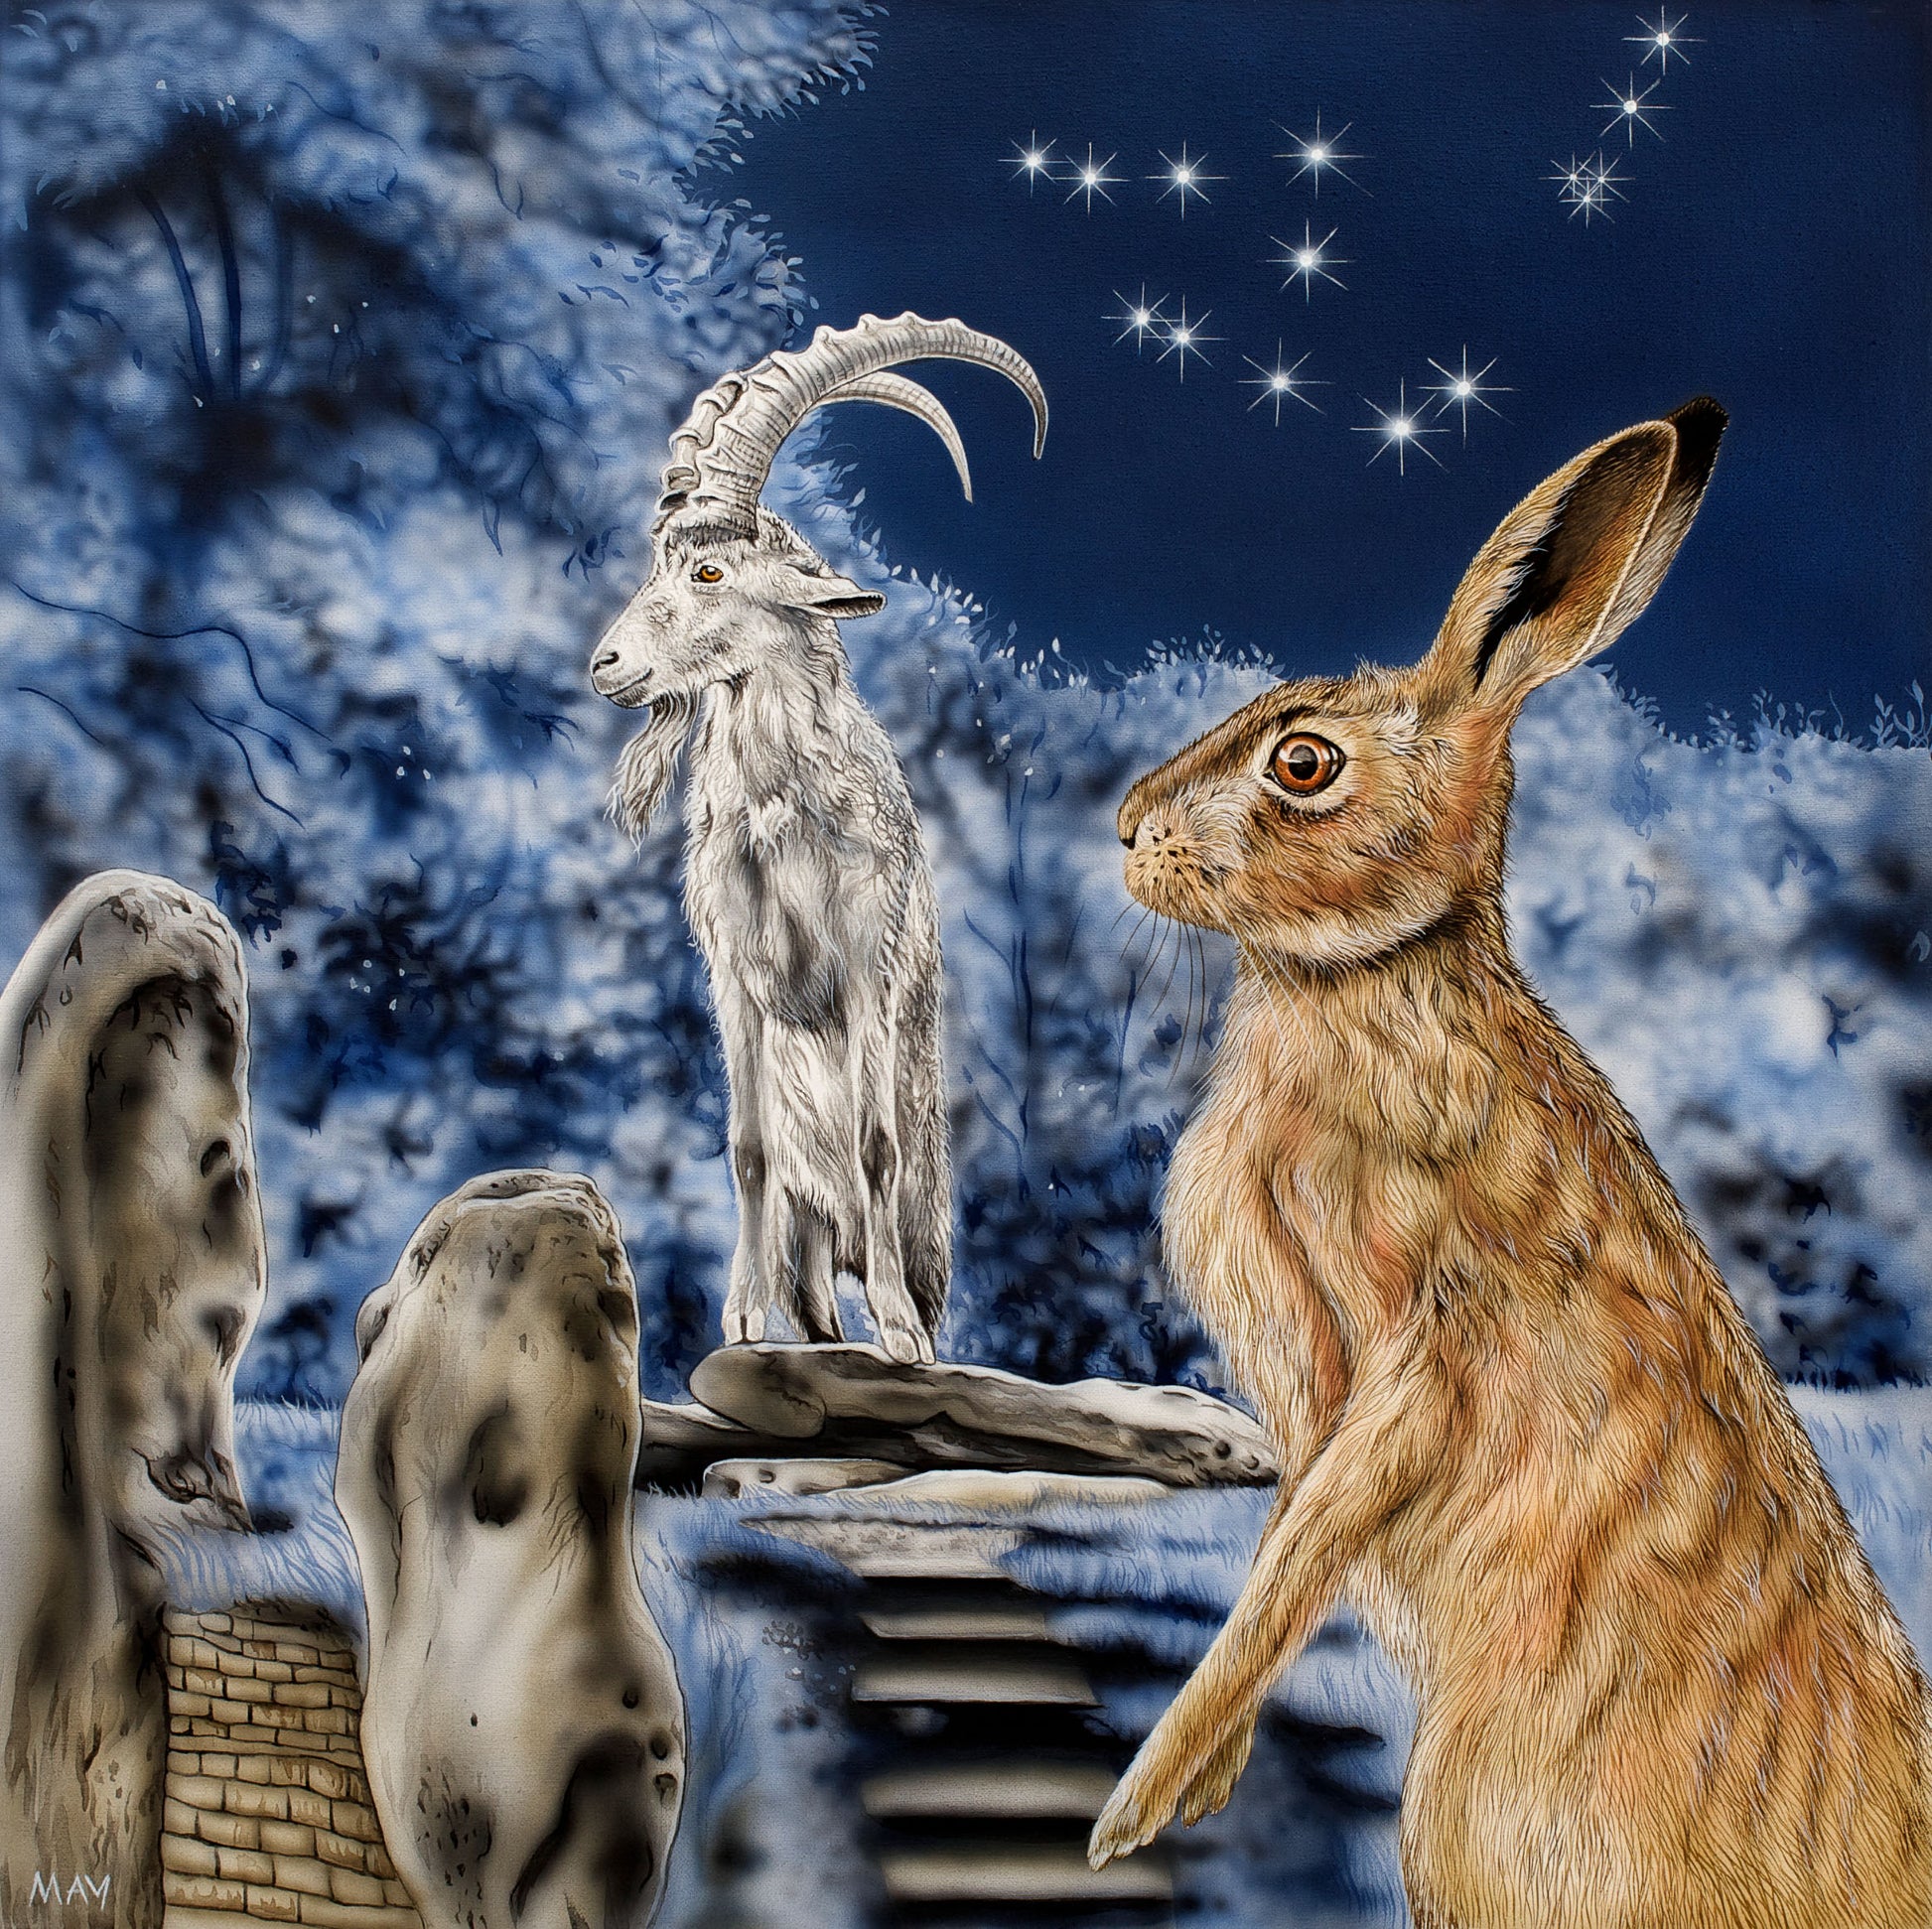 Hare and ram with capricorn constellation in background